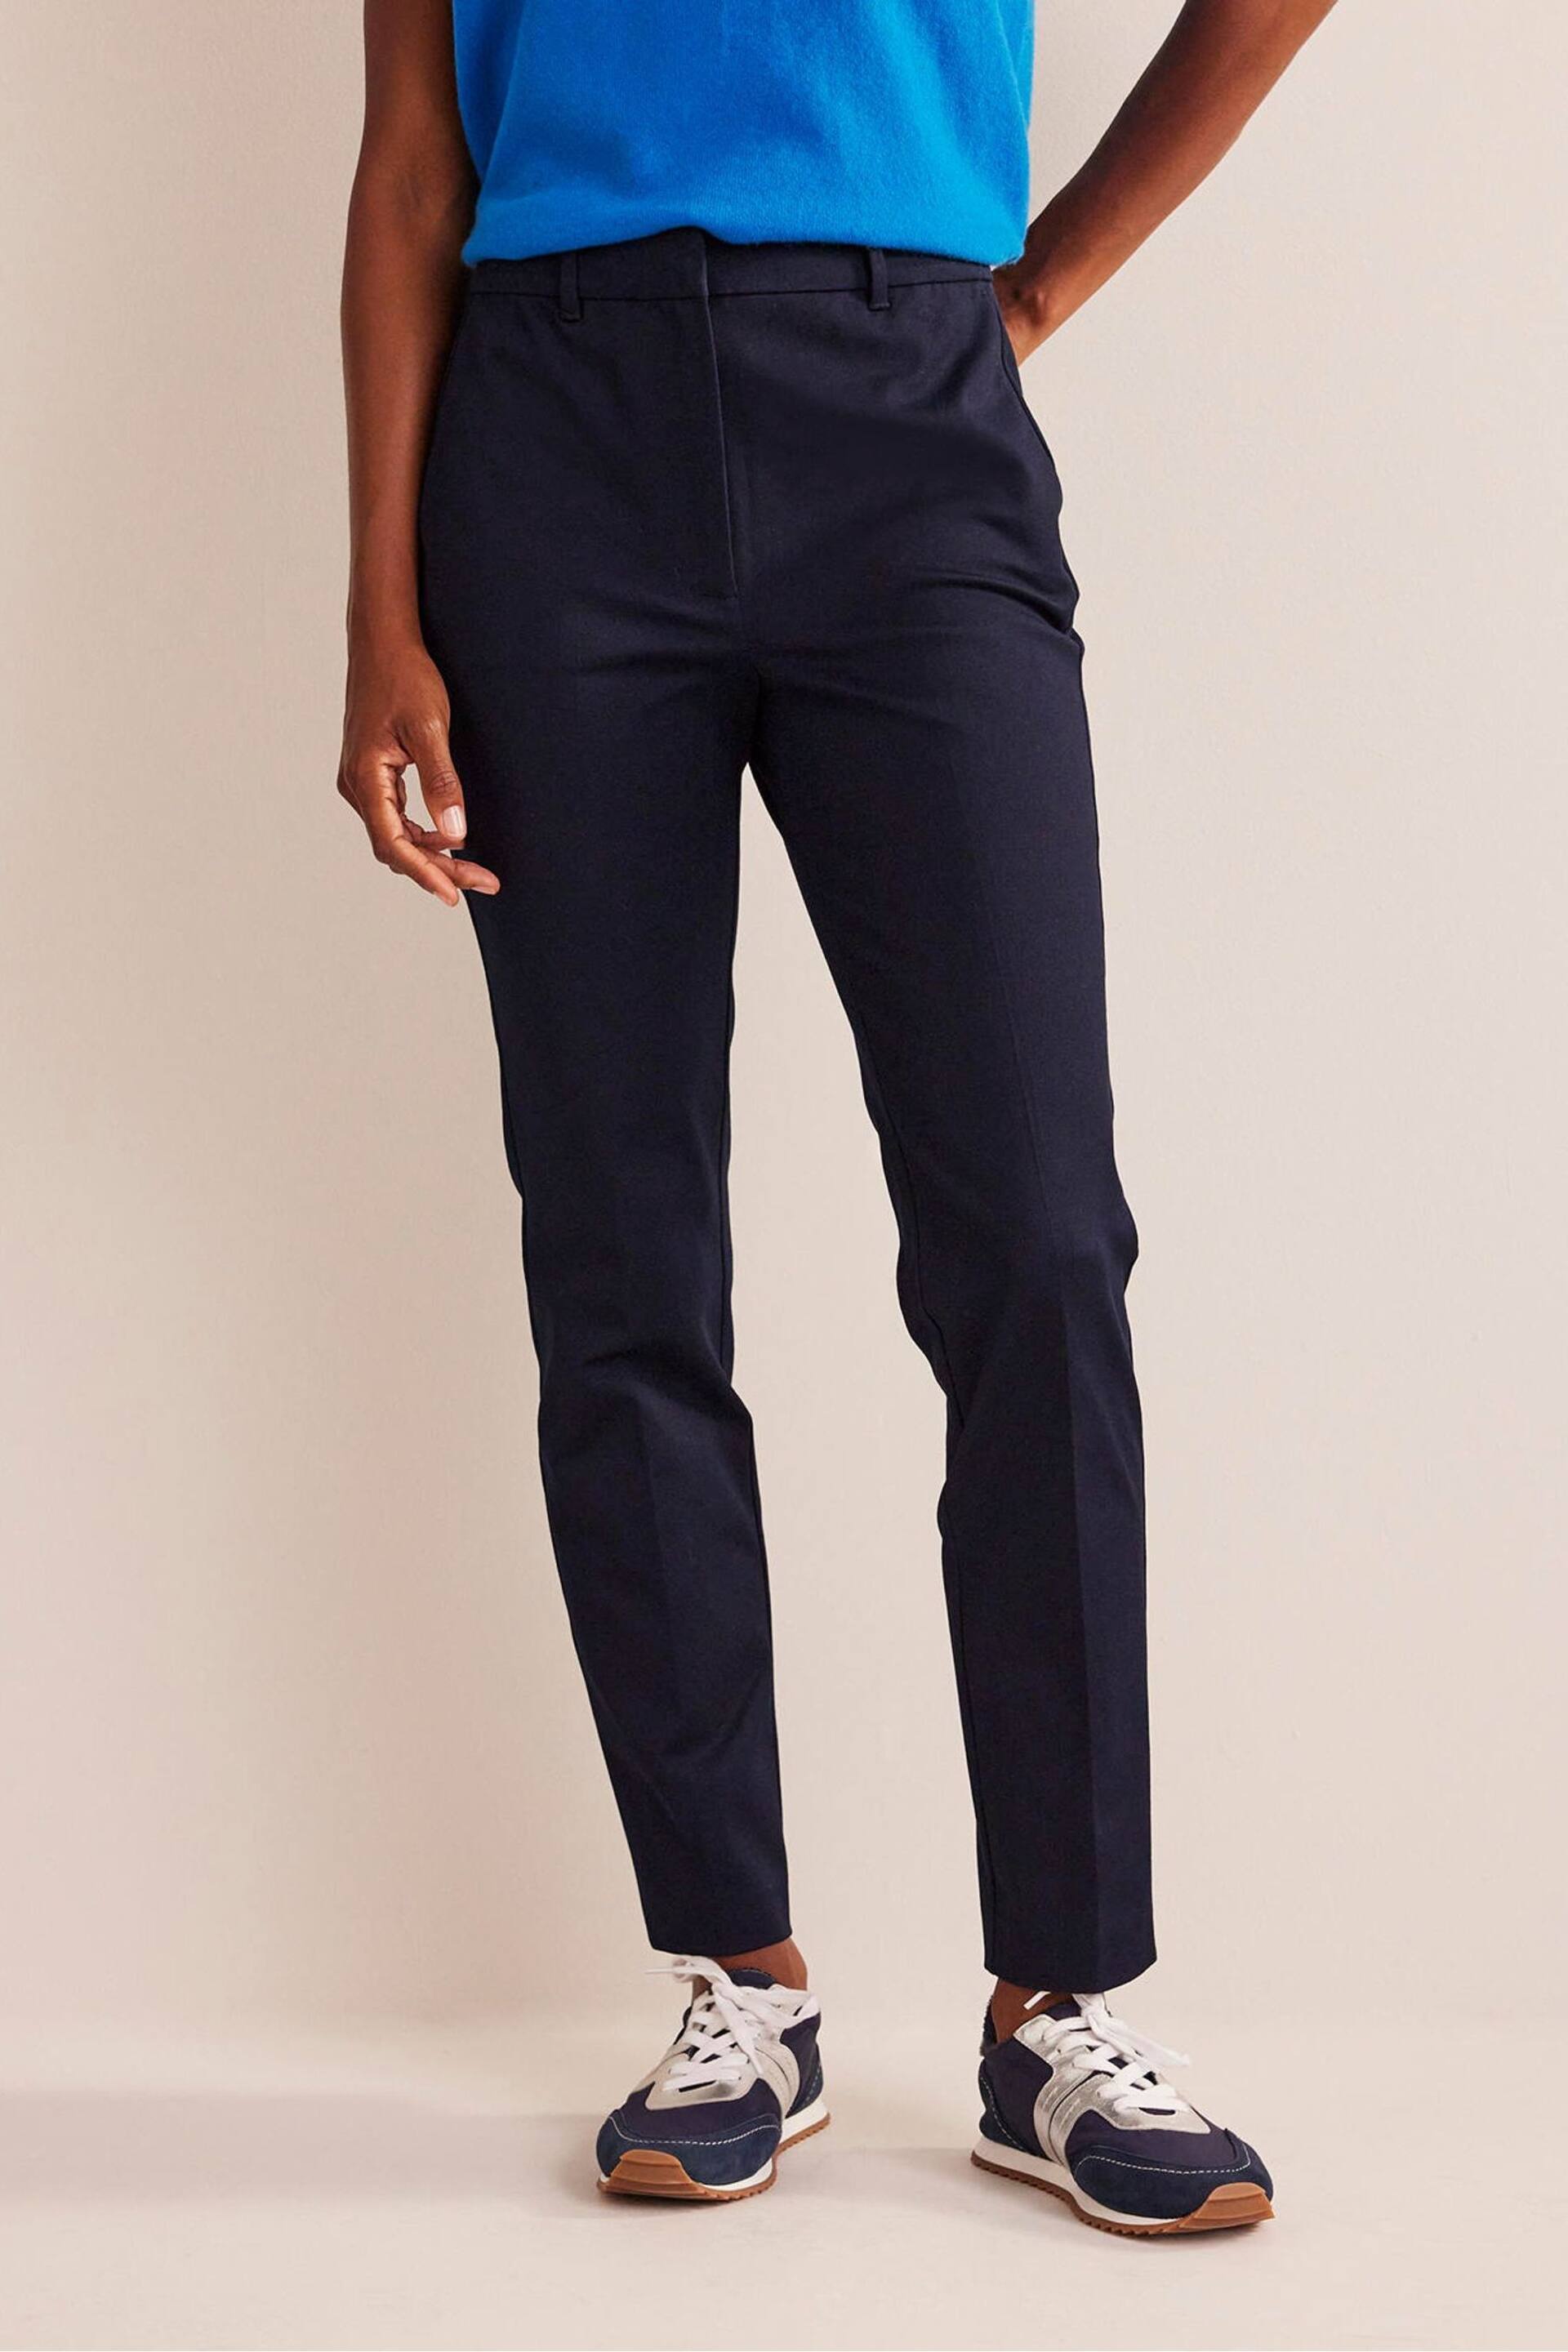 Boden Navy Highgate Bi-Stretch Trousers - Image 1 of 5